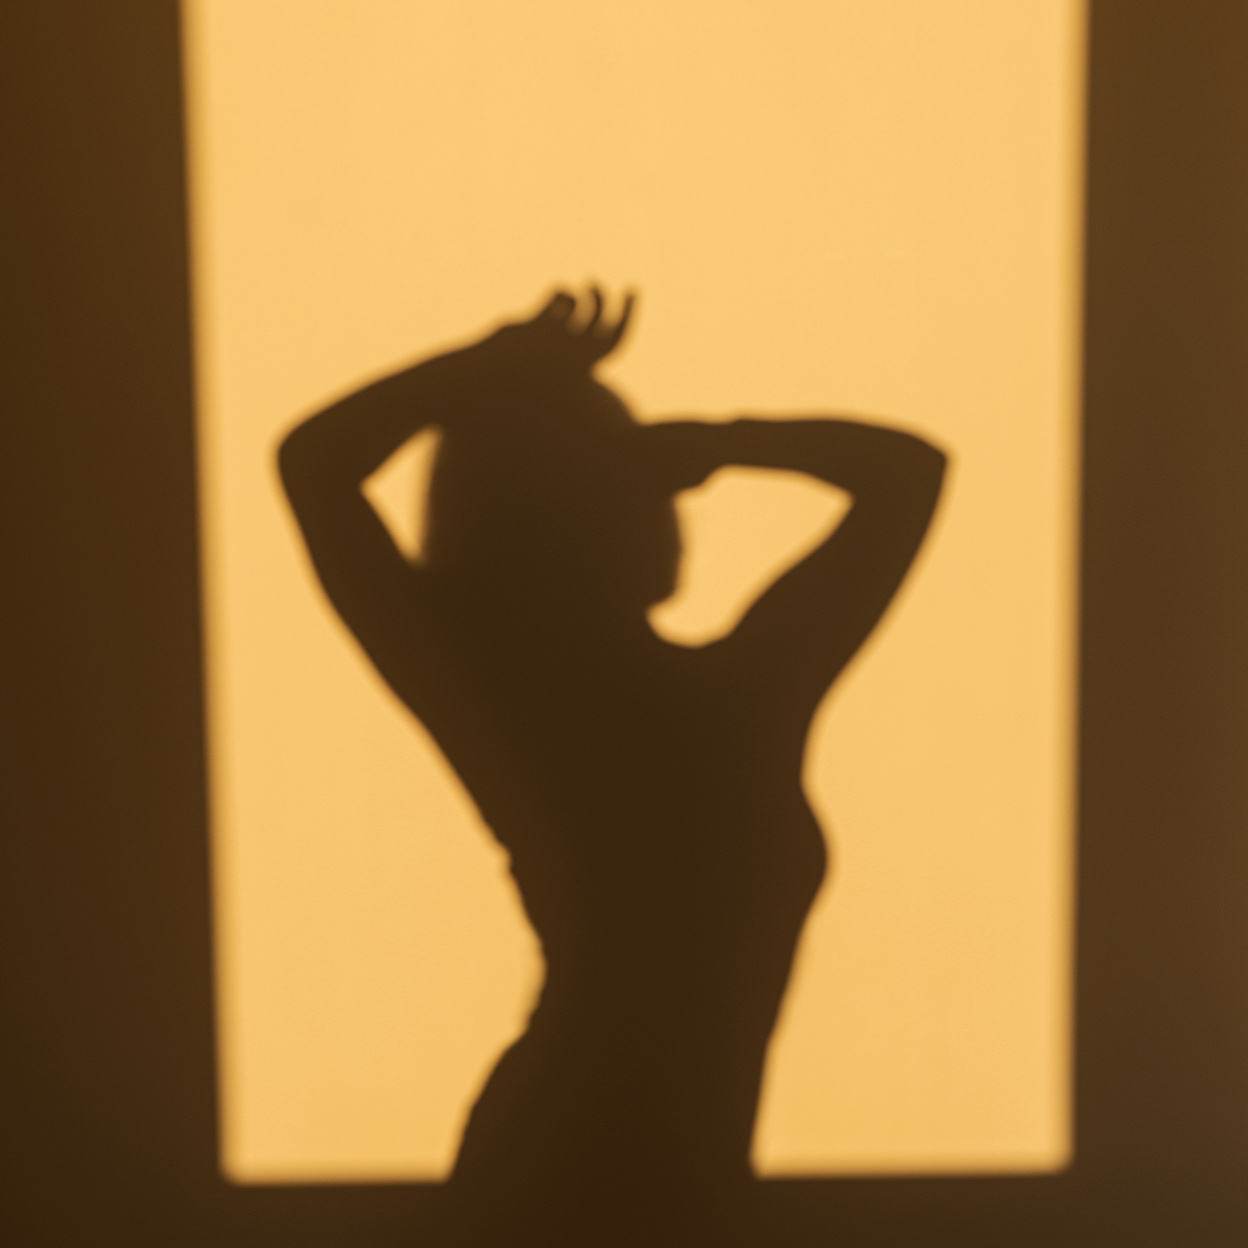 Shadow of a Sexy Woman